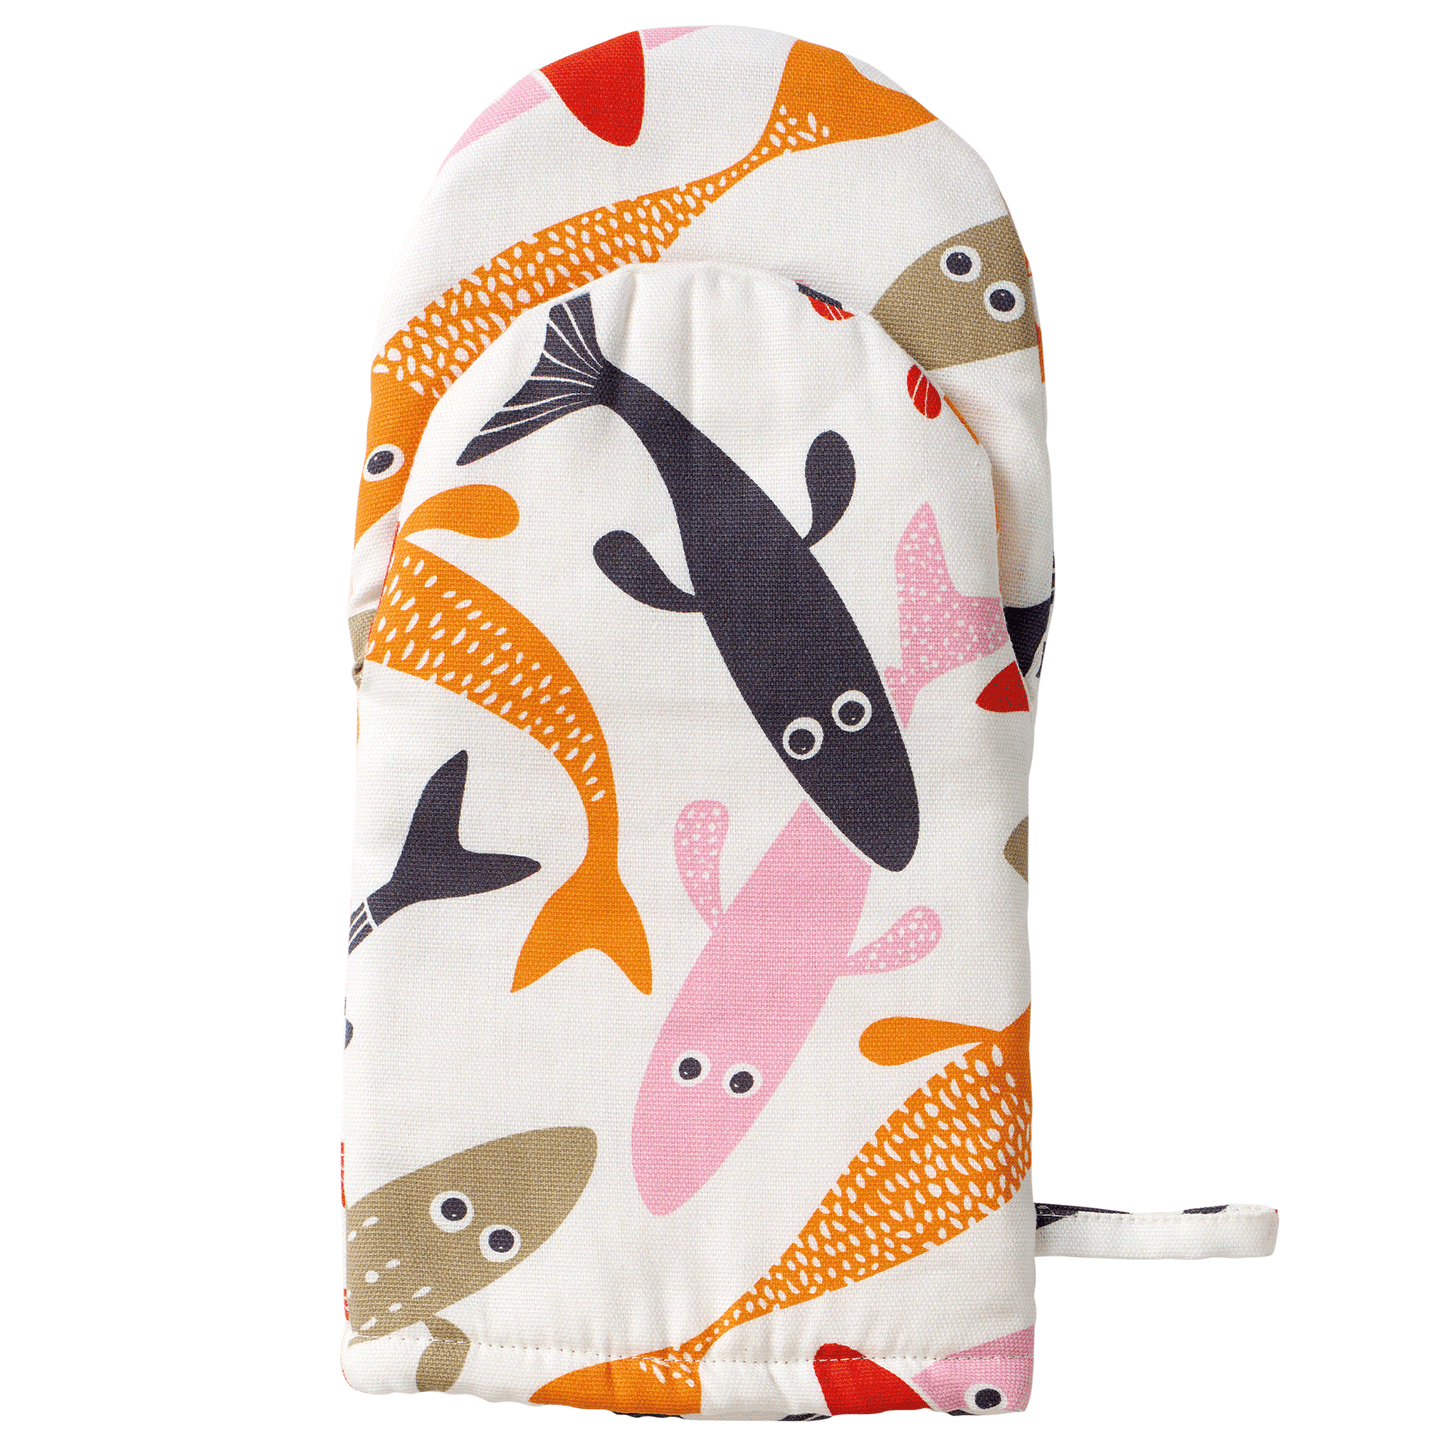 The Pond Cotton Oven Glove